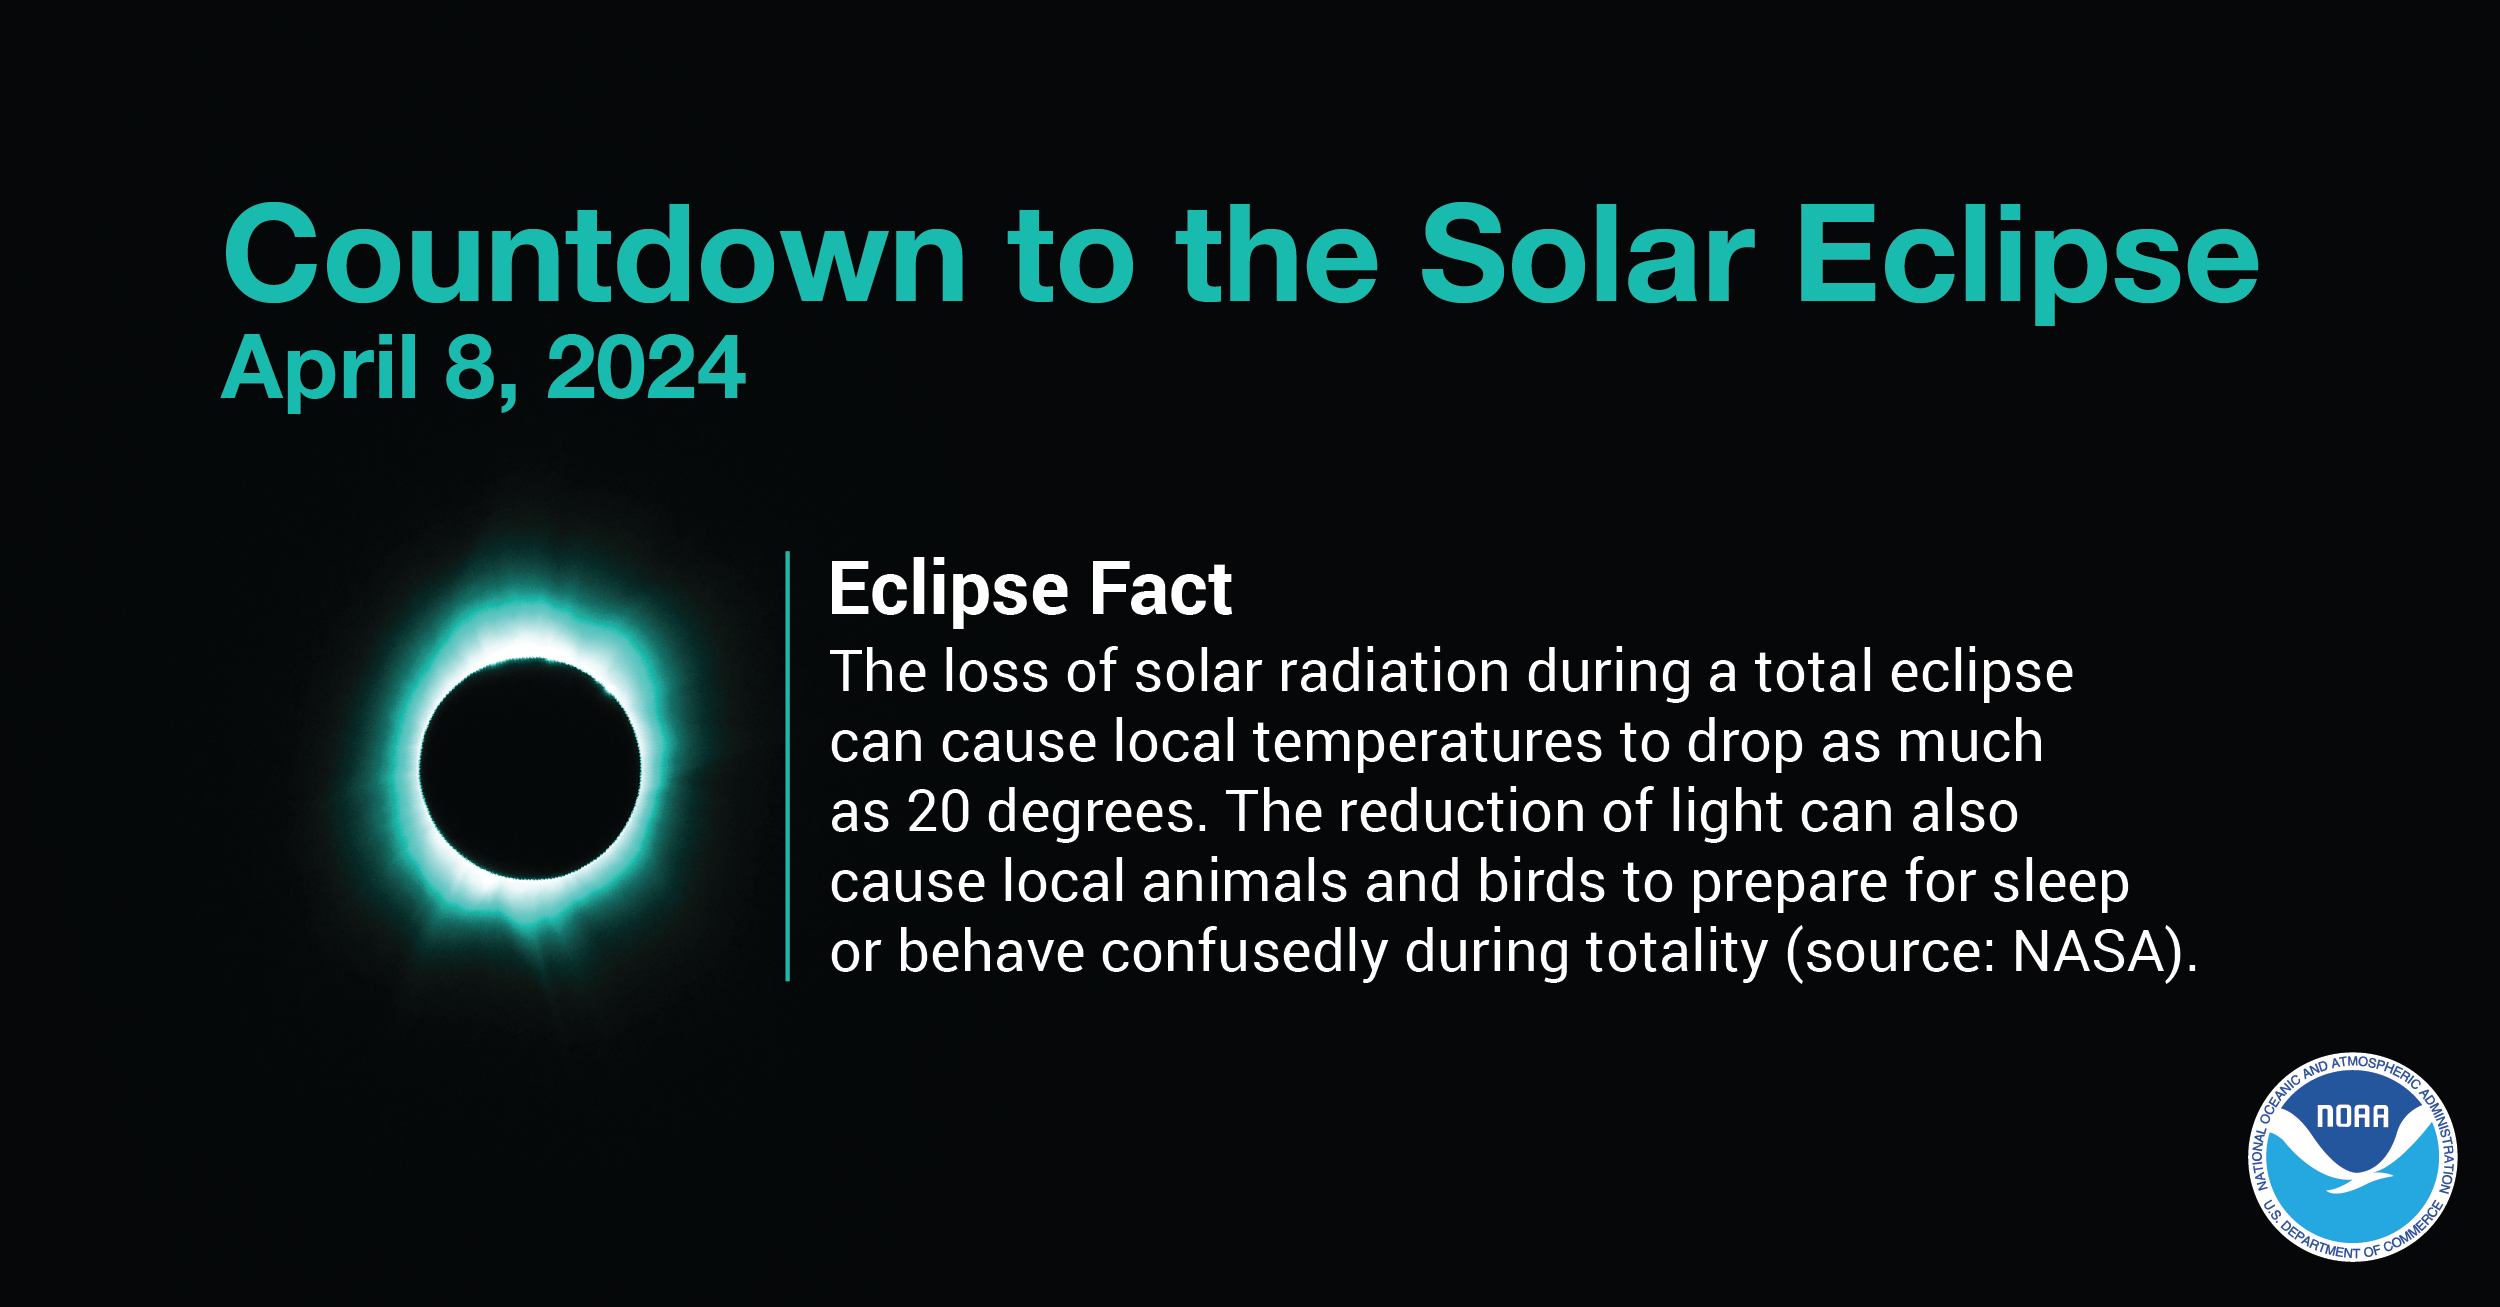 Eclipse Fact 5